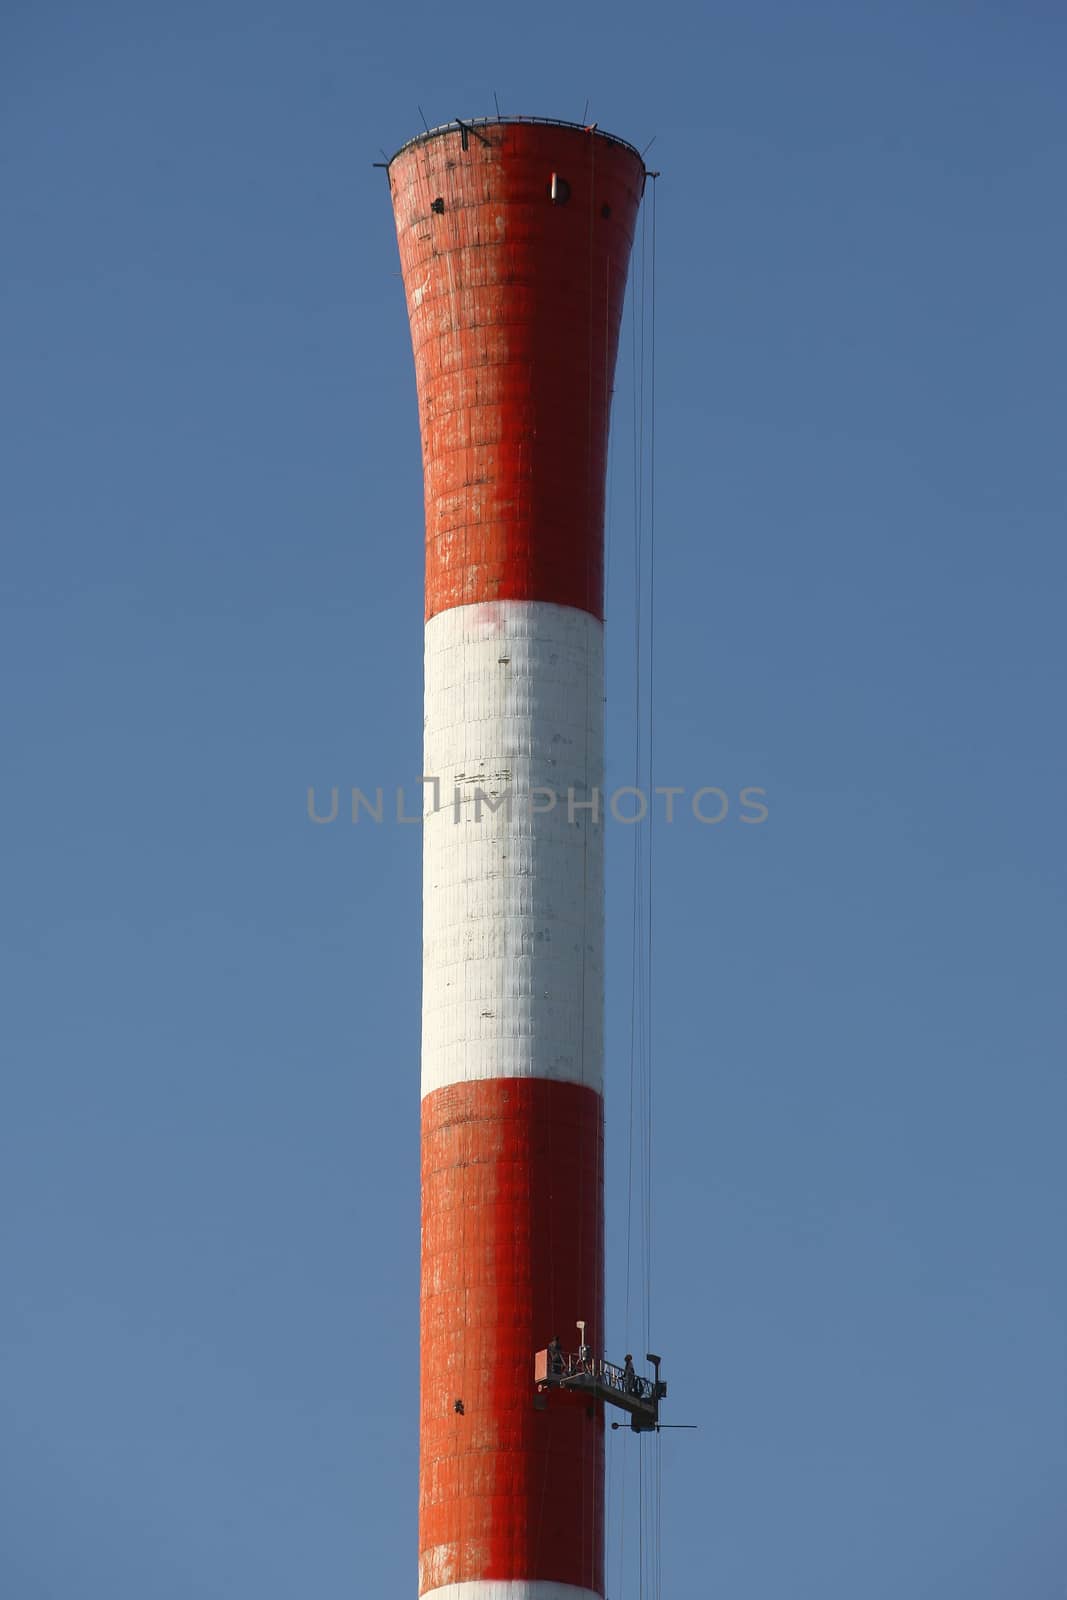 Heat and power central, smoke pipe against clear blue sky by nemar74